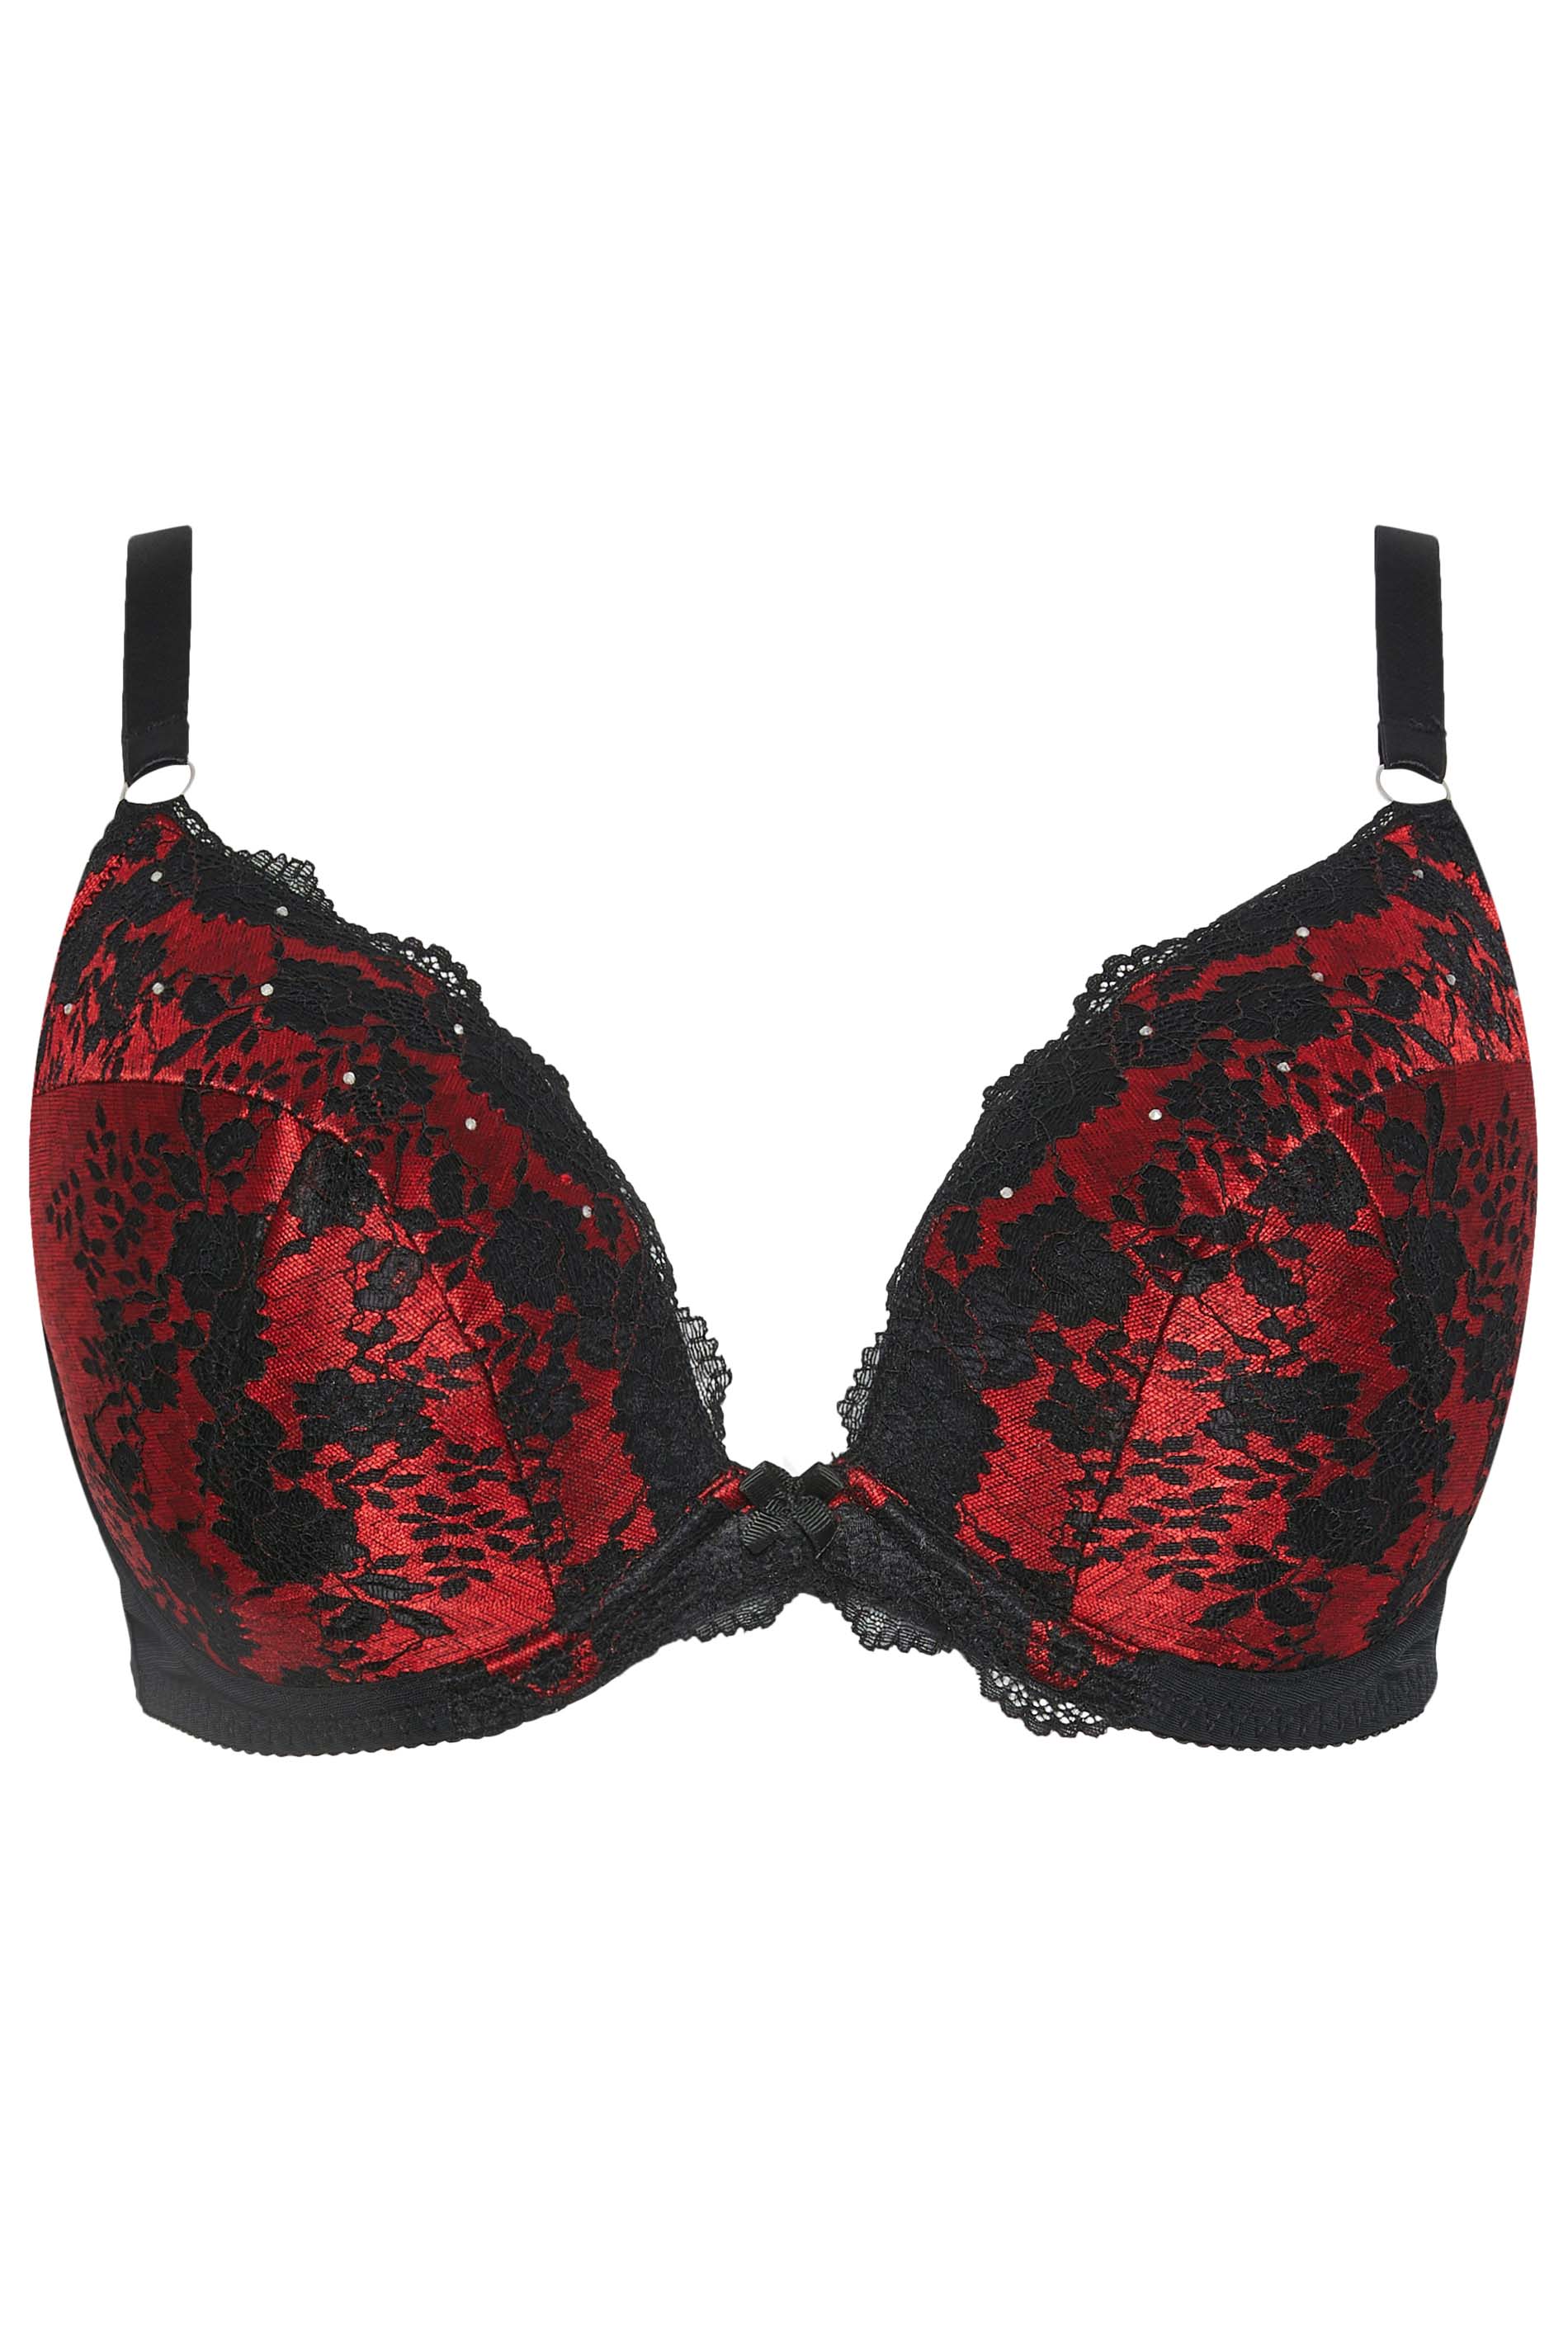 Black lace on Red underwire push-up Bra- bow detail - Size 30B